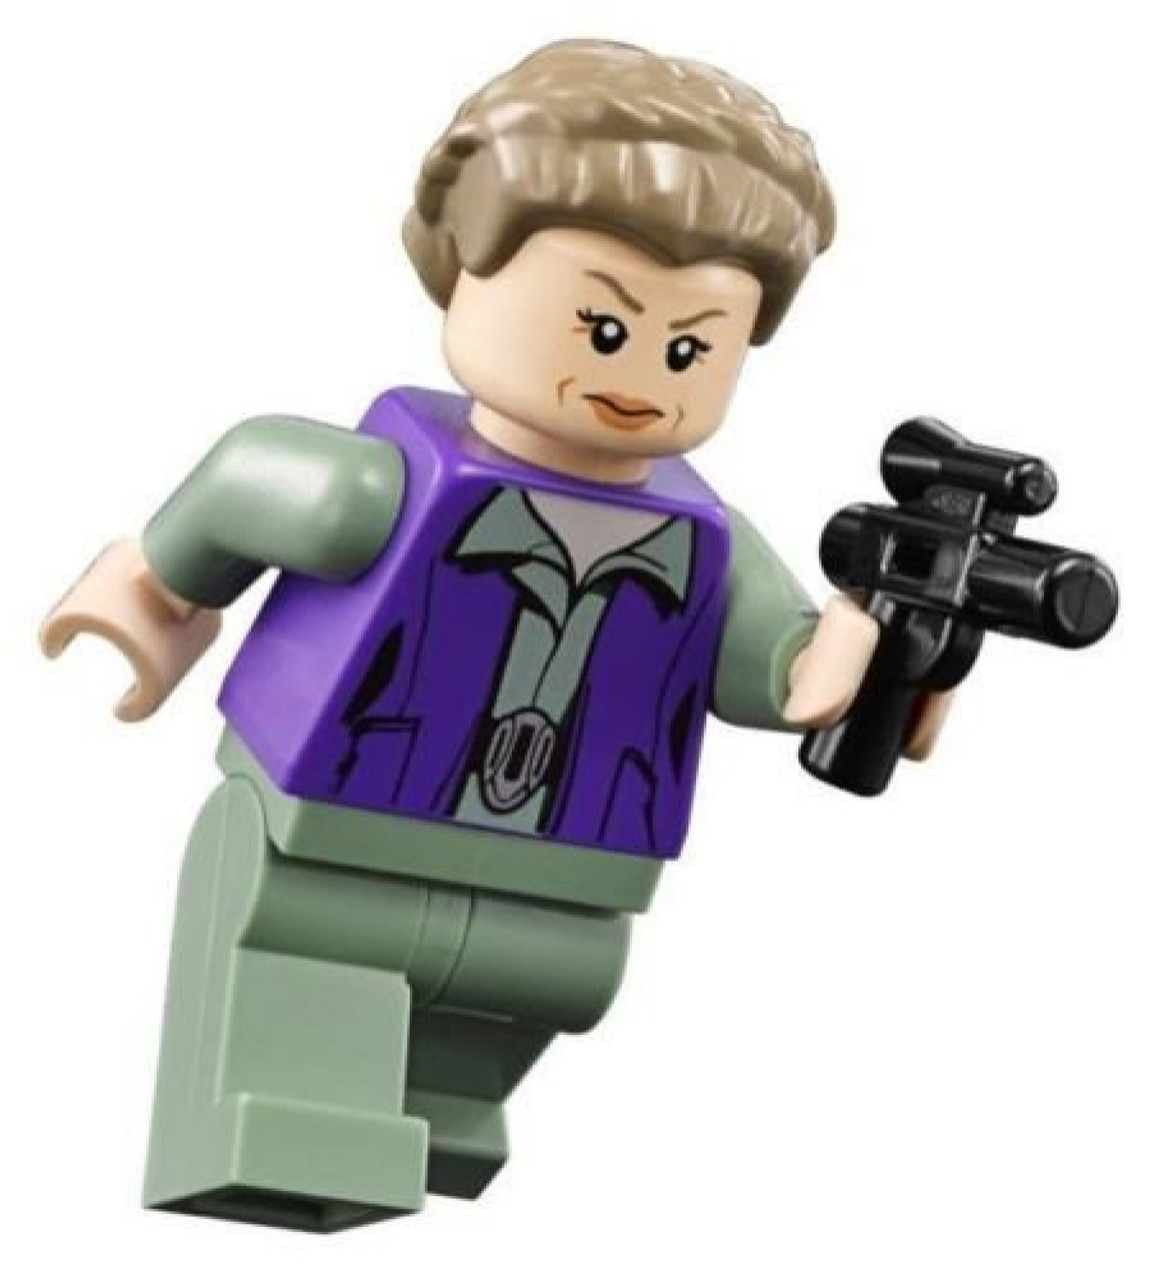 Download Lego Star Wars Minifigure General Princess Leia With Blaster 75140 The Brick People